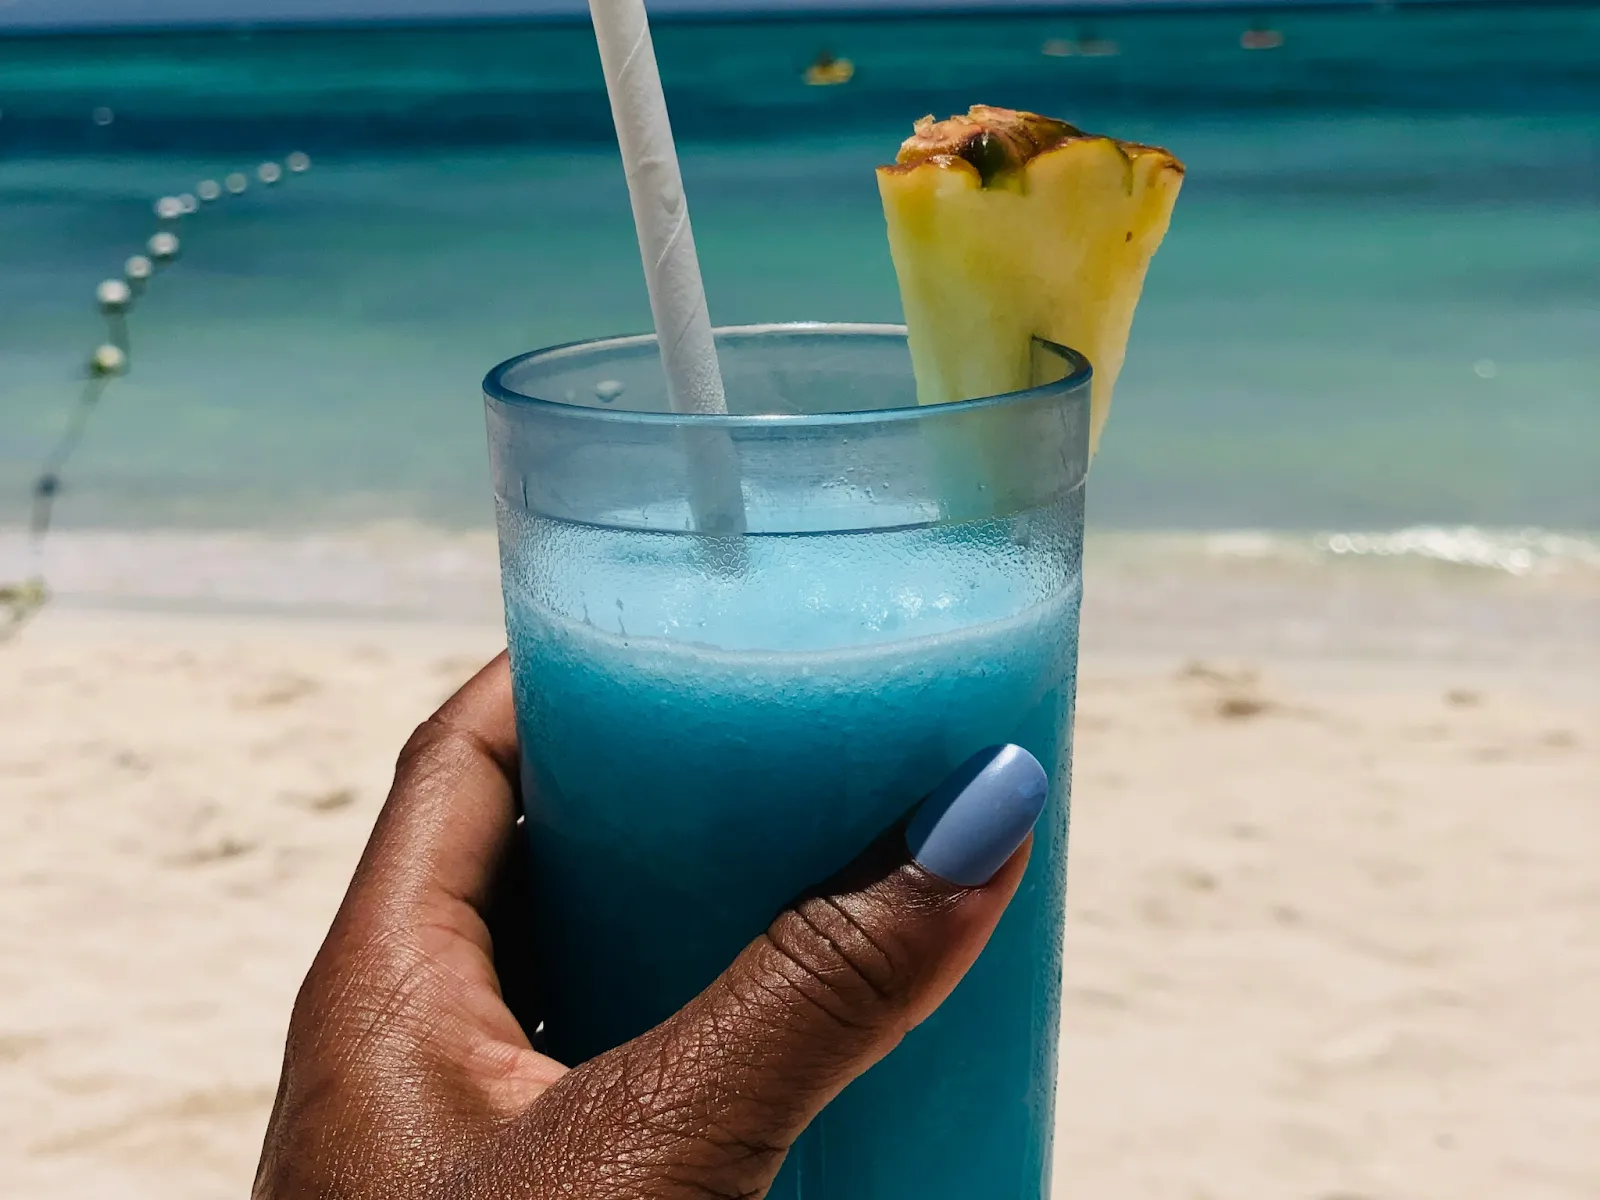 A woman’s hand holding a glass of blue cocktail drink with a white paper straw and a slice of pineapple